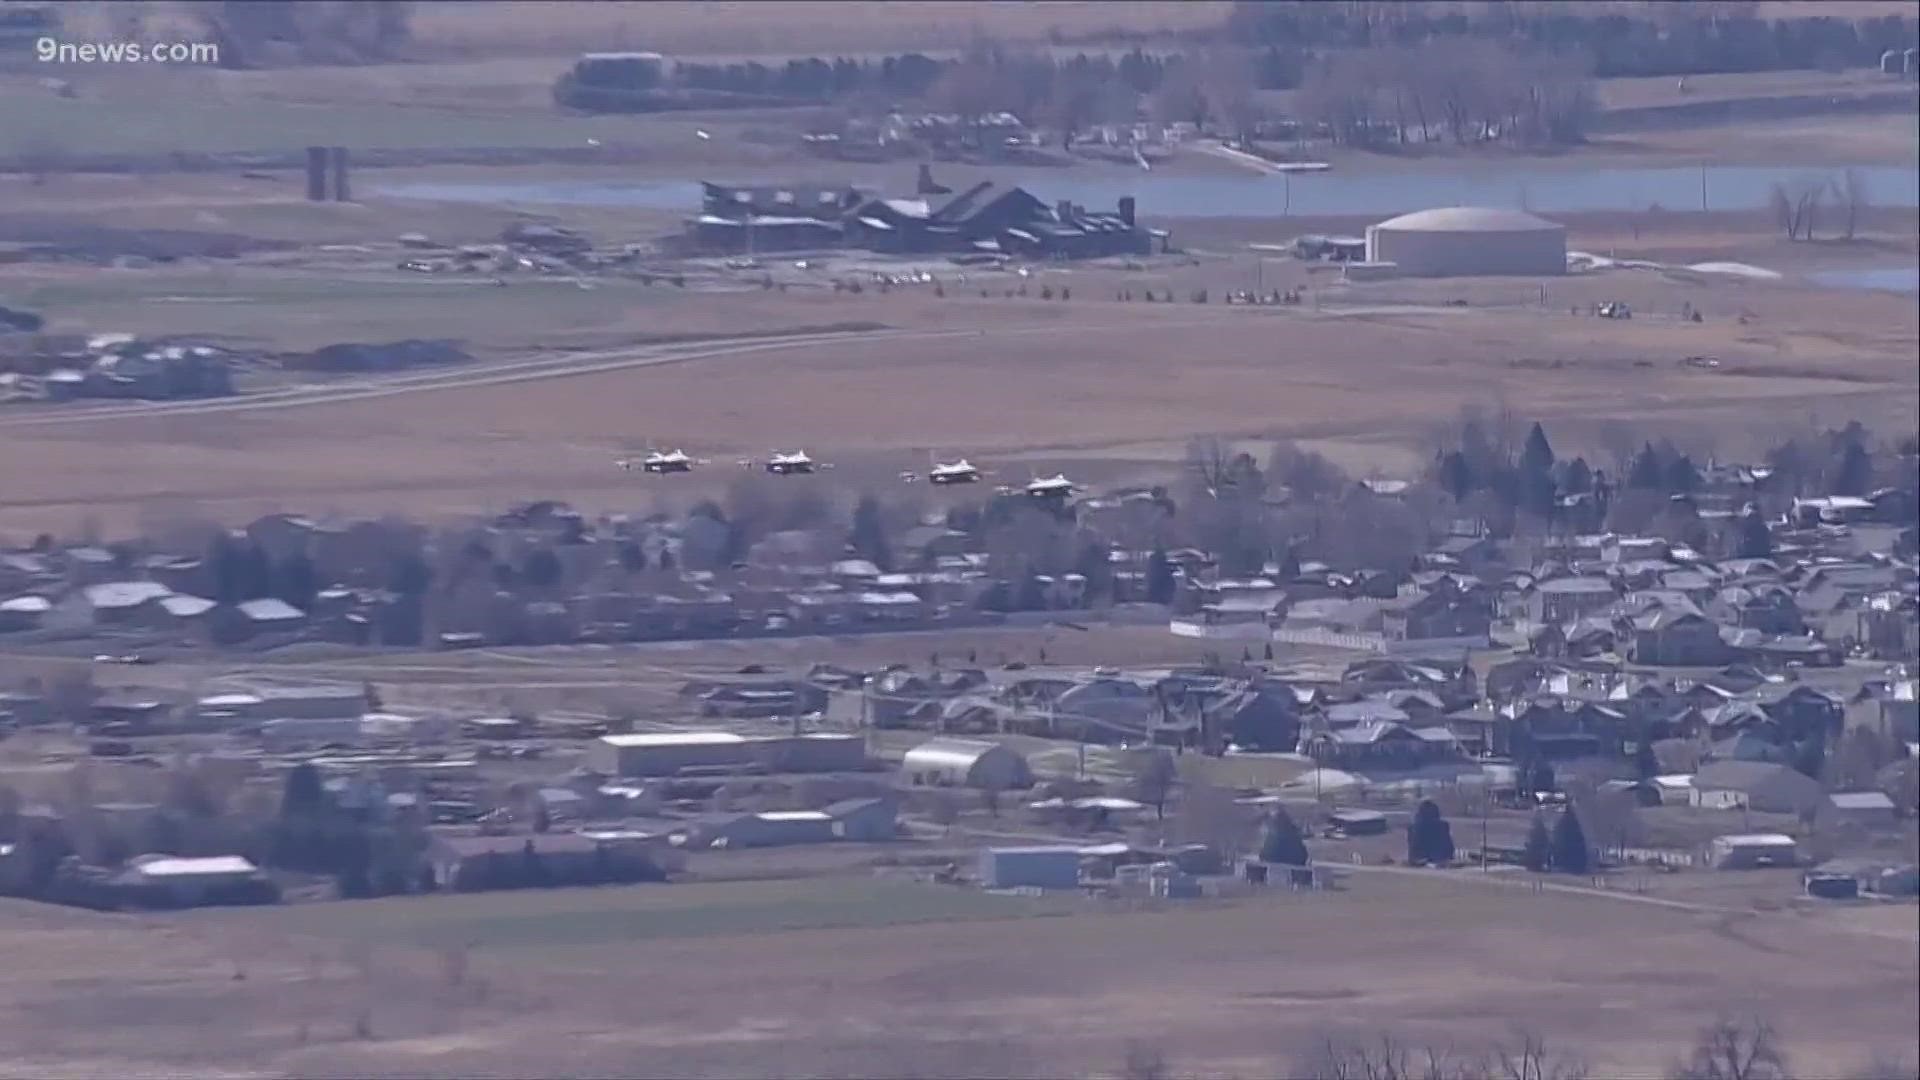 F-16 Fighting Falcon aircraft fly over Loveland to salute veterans past and present.